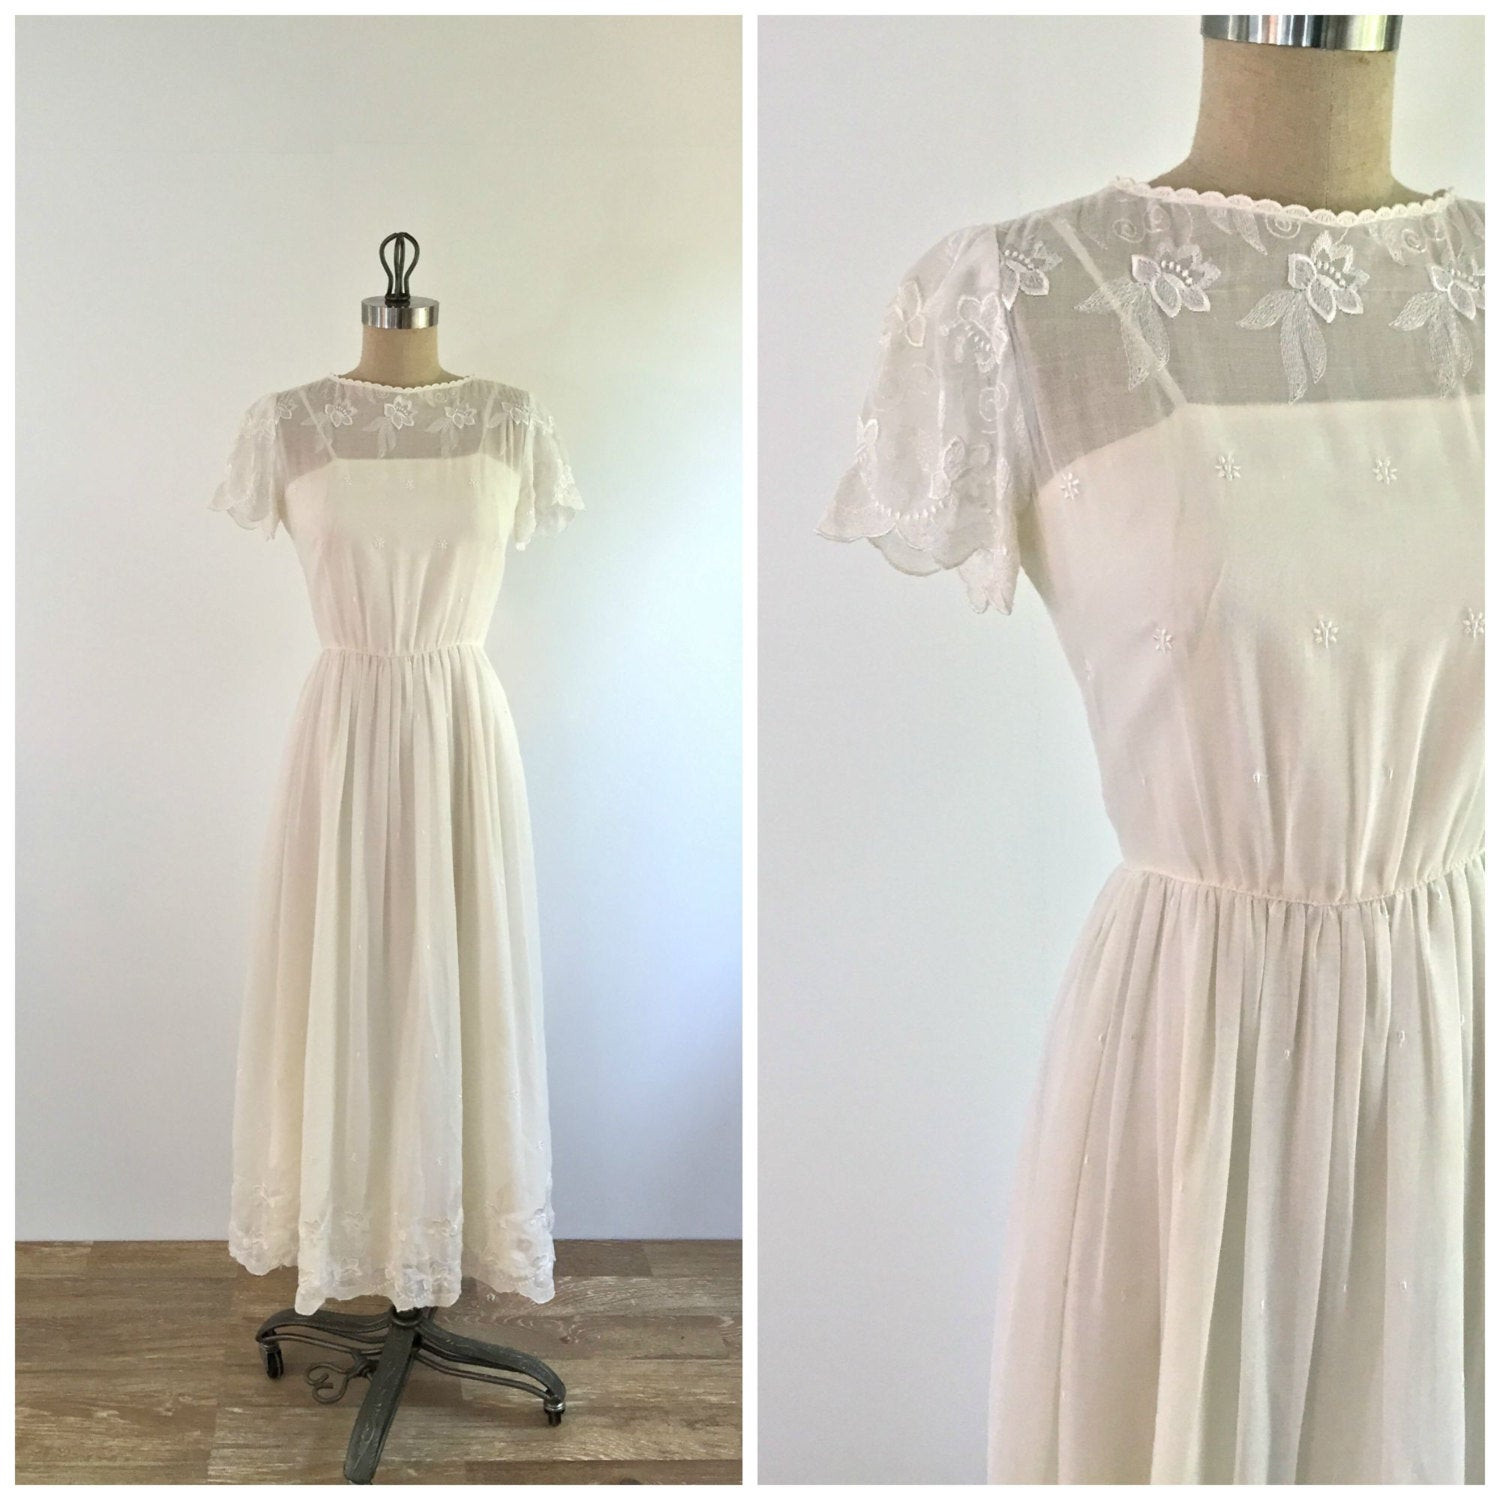 Saks Fifth Avenue Wedding Gowns
 Beautiful Vintage Wedding Dress Saks Fifth Avenue xs small